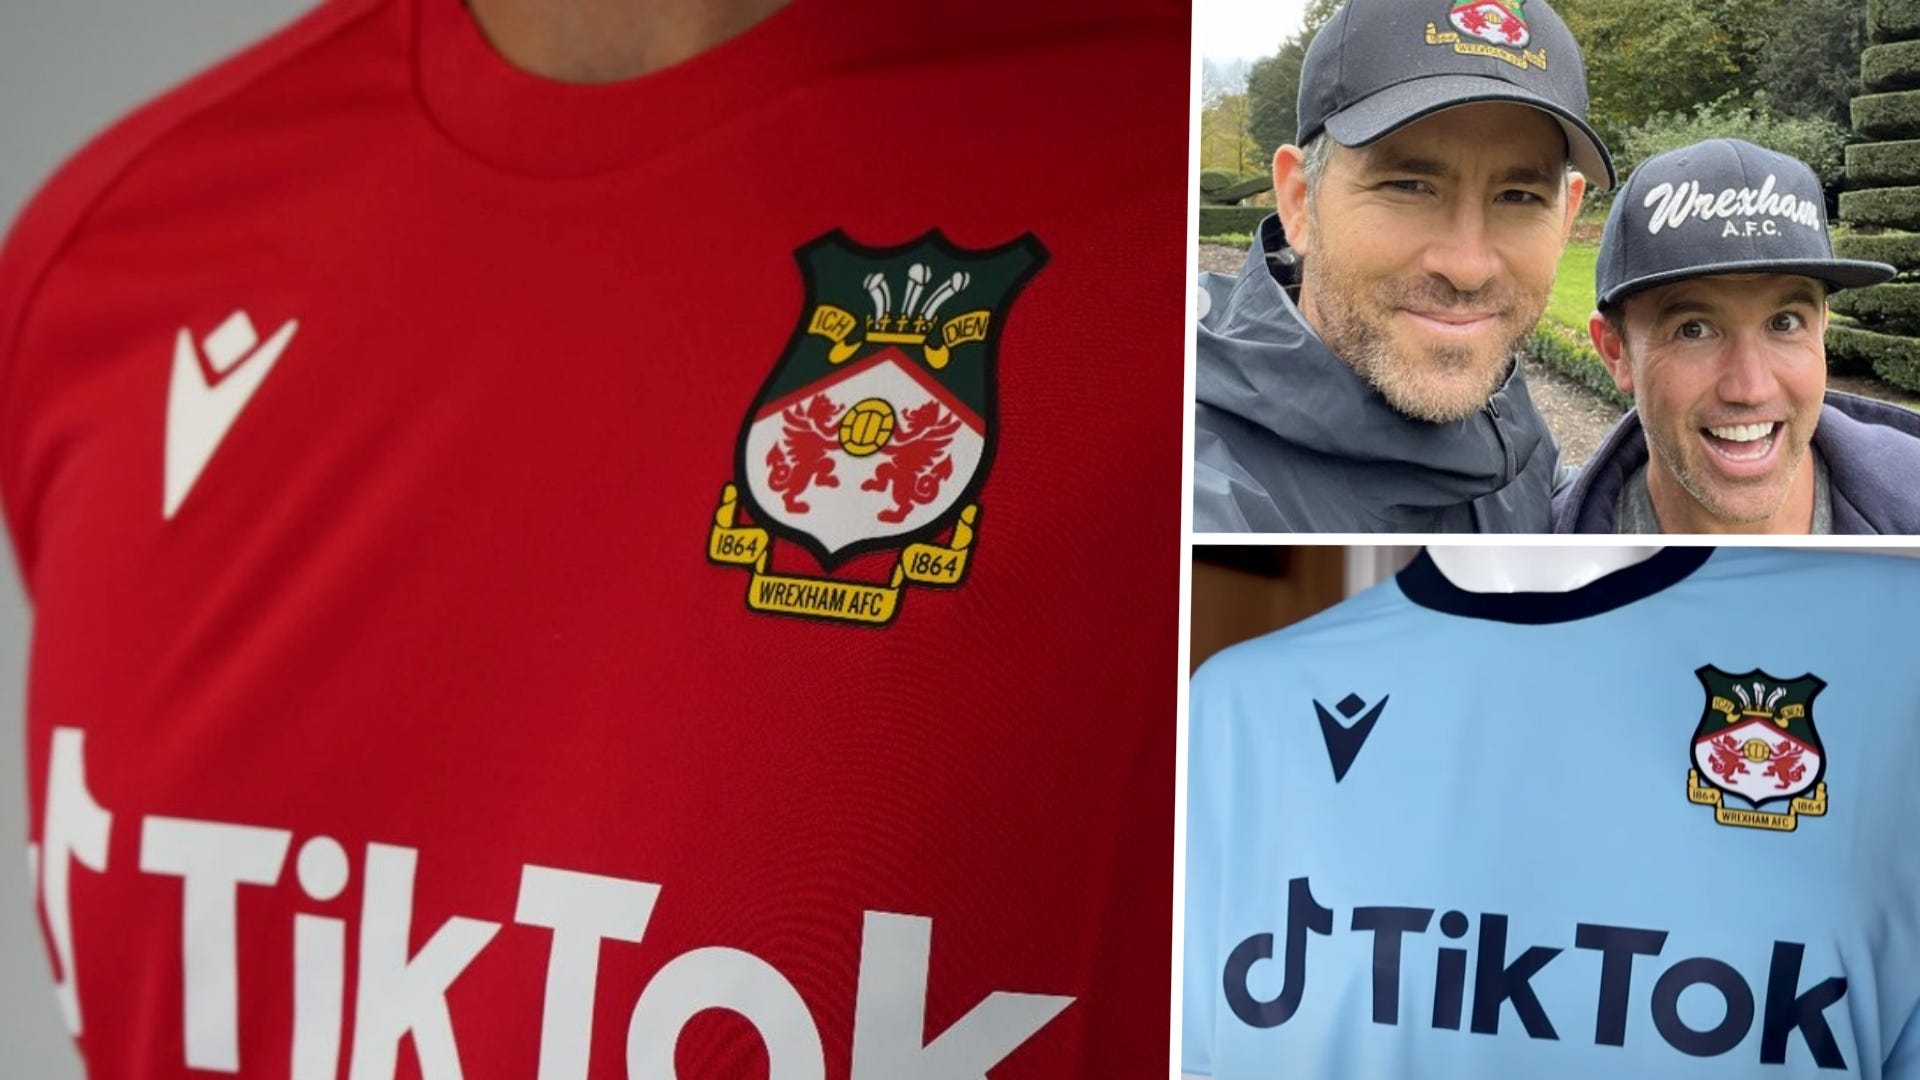 Wrexham kit: Where to buy jerseys, training gear, accessories & prices